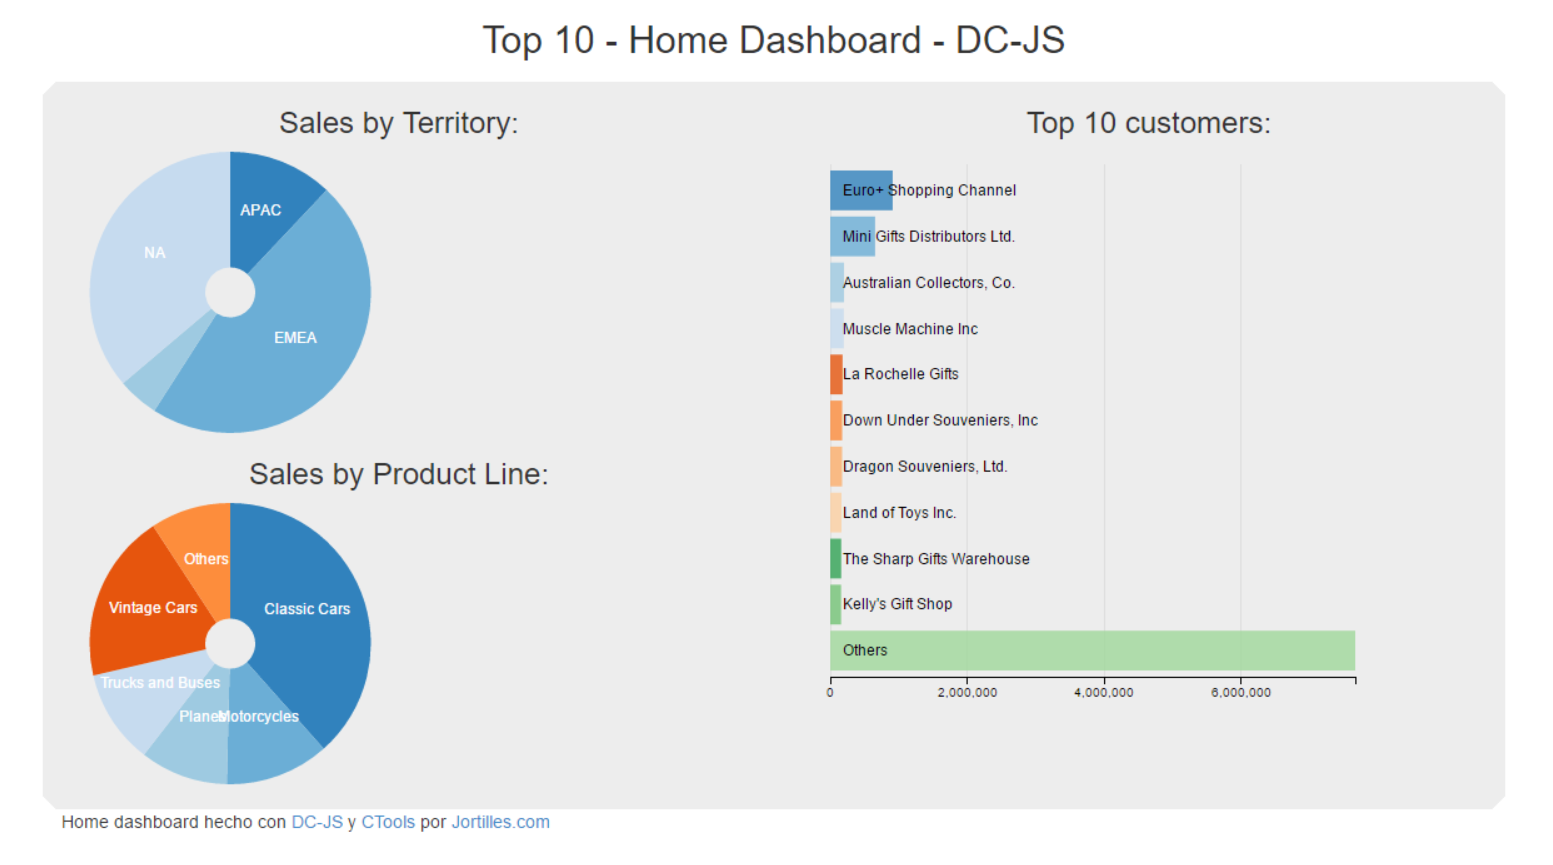 Top 10 Home Dashboard DC-JS